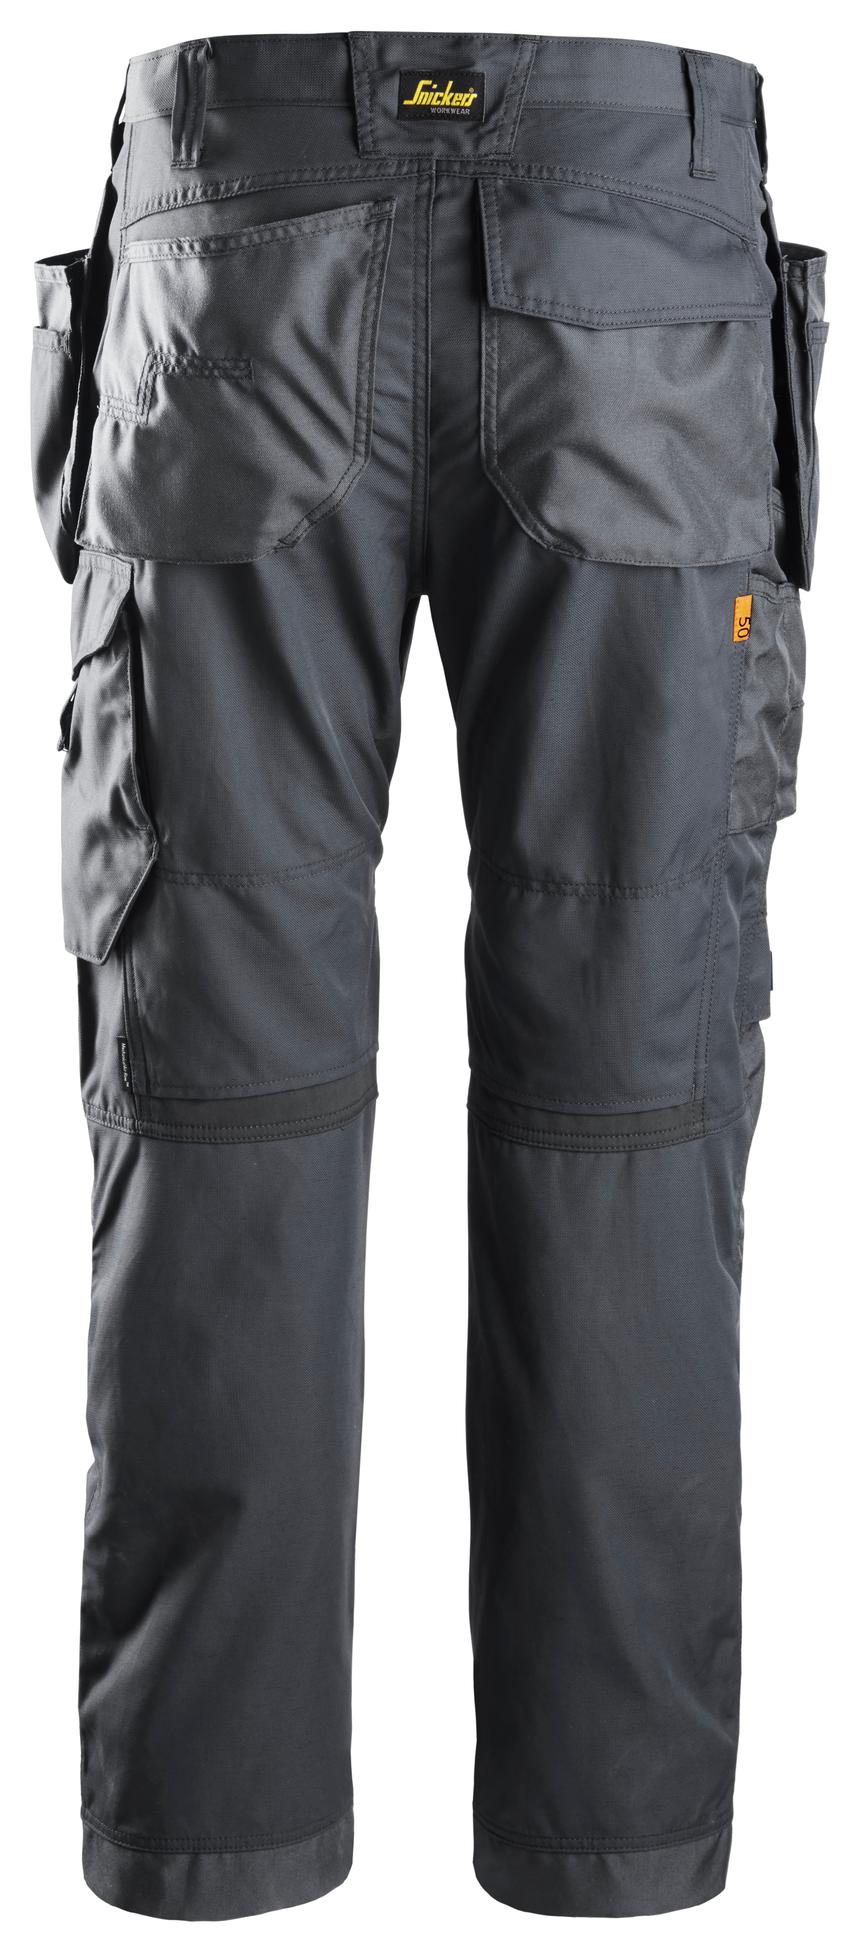 Grey Mens Cargo Combat Work Trousers Workwear Pants With Holster Pockets. |  eBay